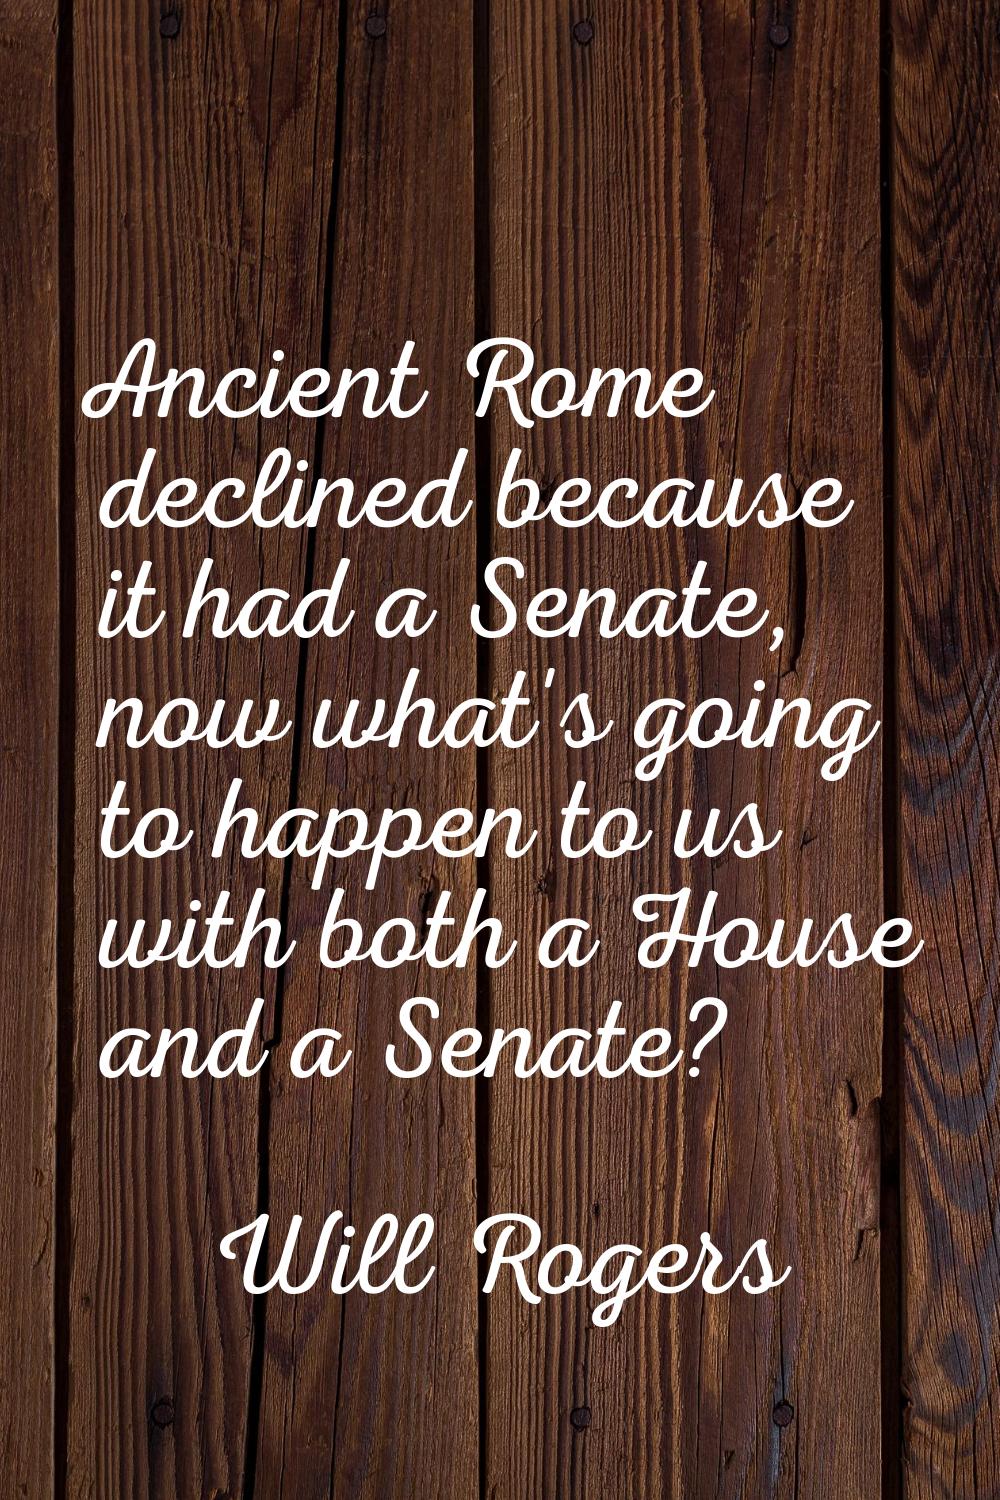 Ancient Rome declined because it had a Senate, now what's going to happen to us with both a House a